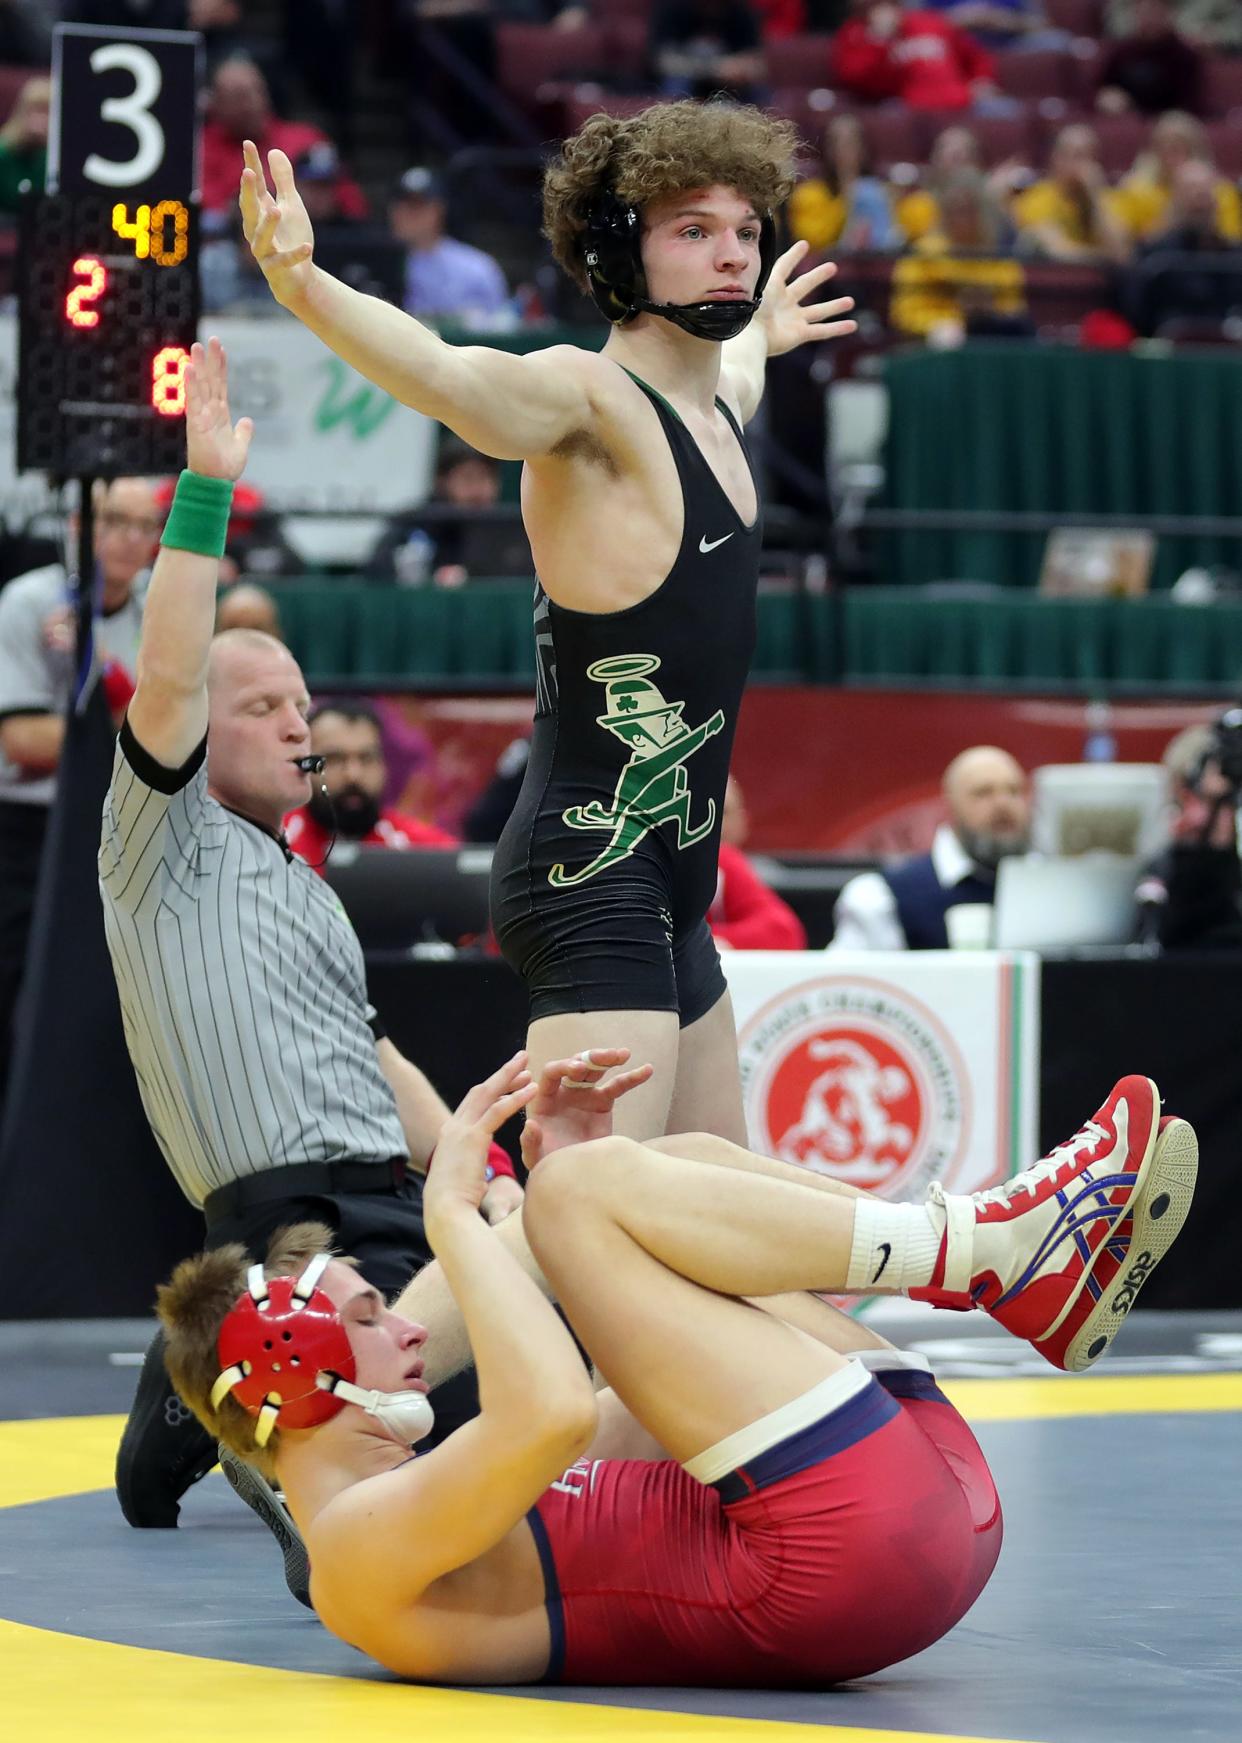 Bryce Skinner of STVM, top, celebrates after winning the state title at last year's OHSAA state wrestling tournament.